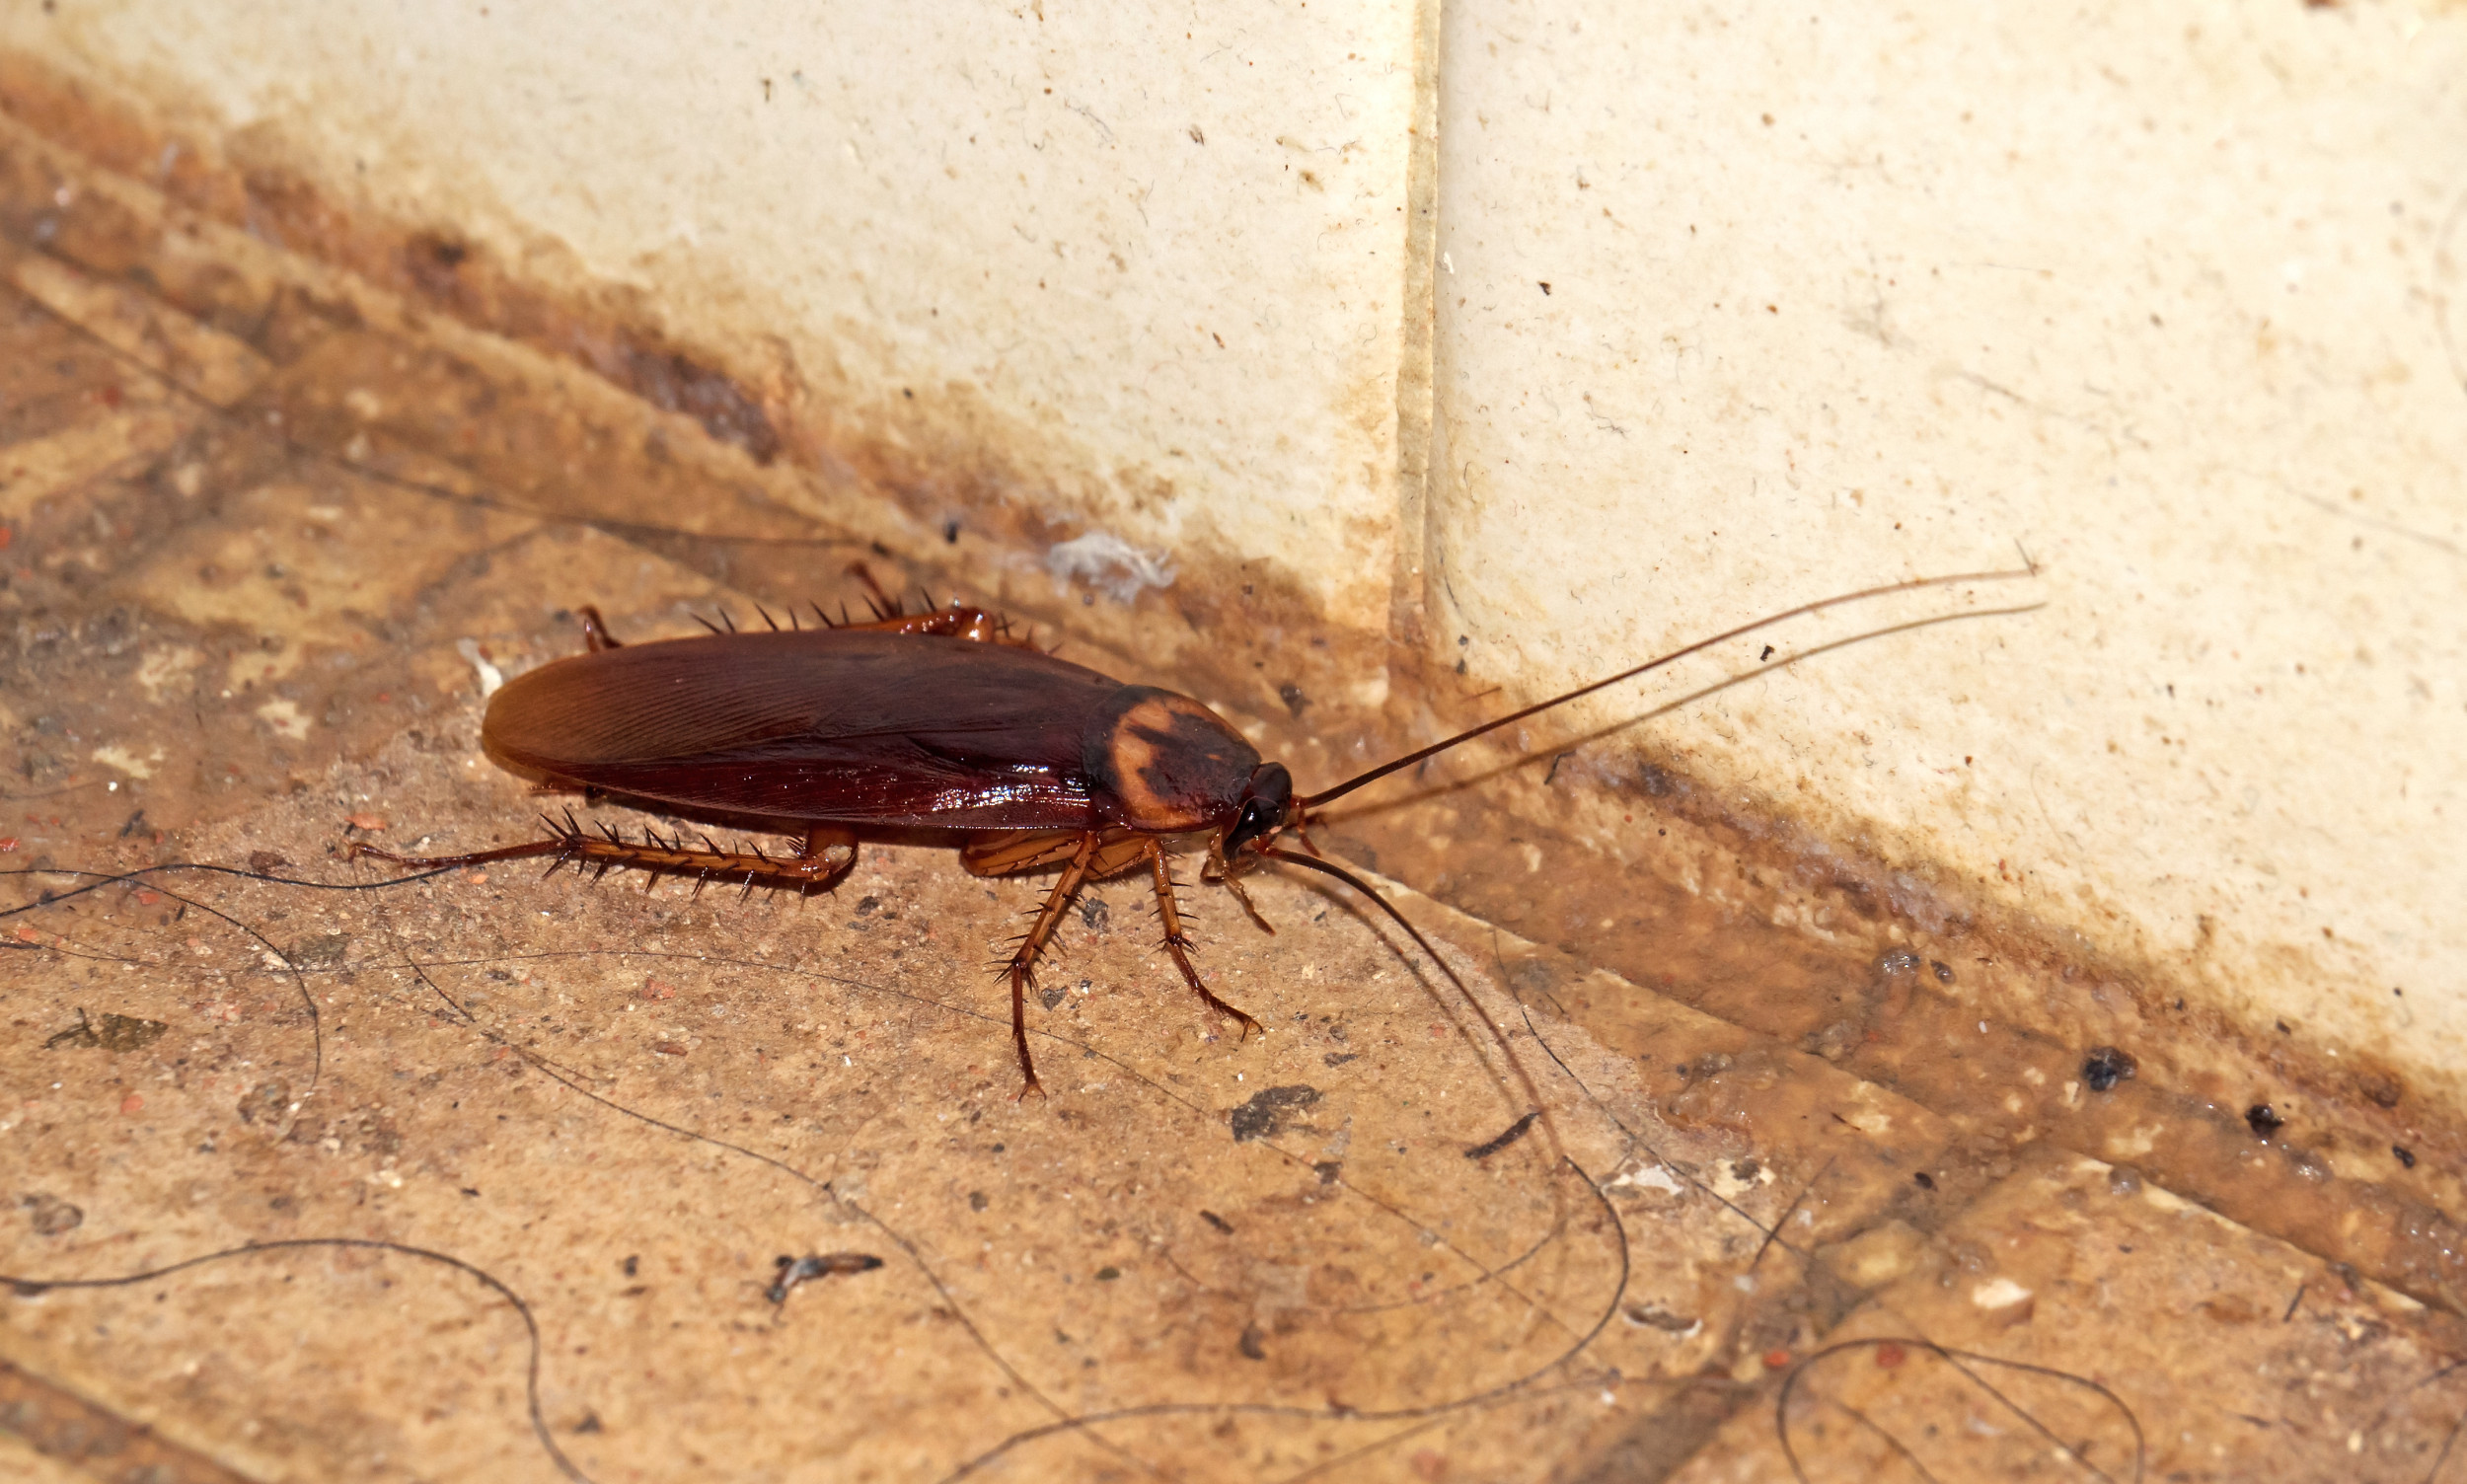 Startling roach infestation found inside Denny's among issues on